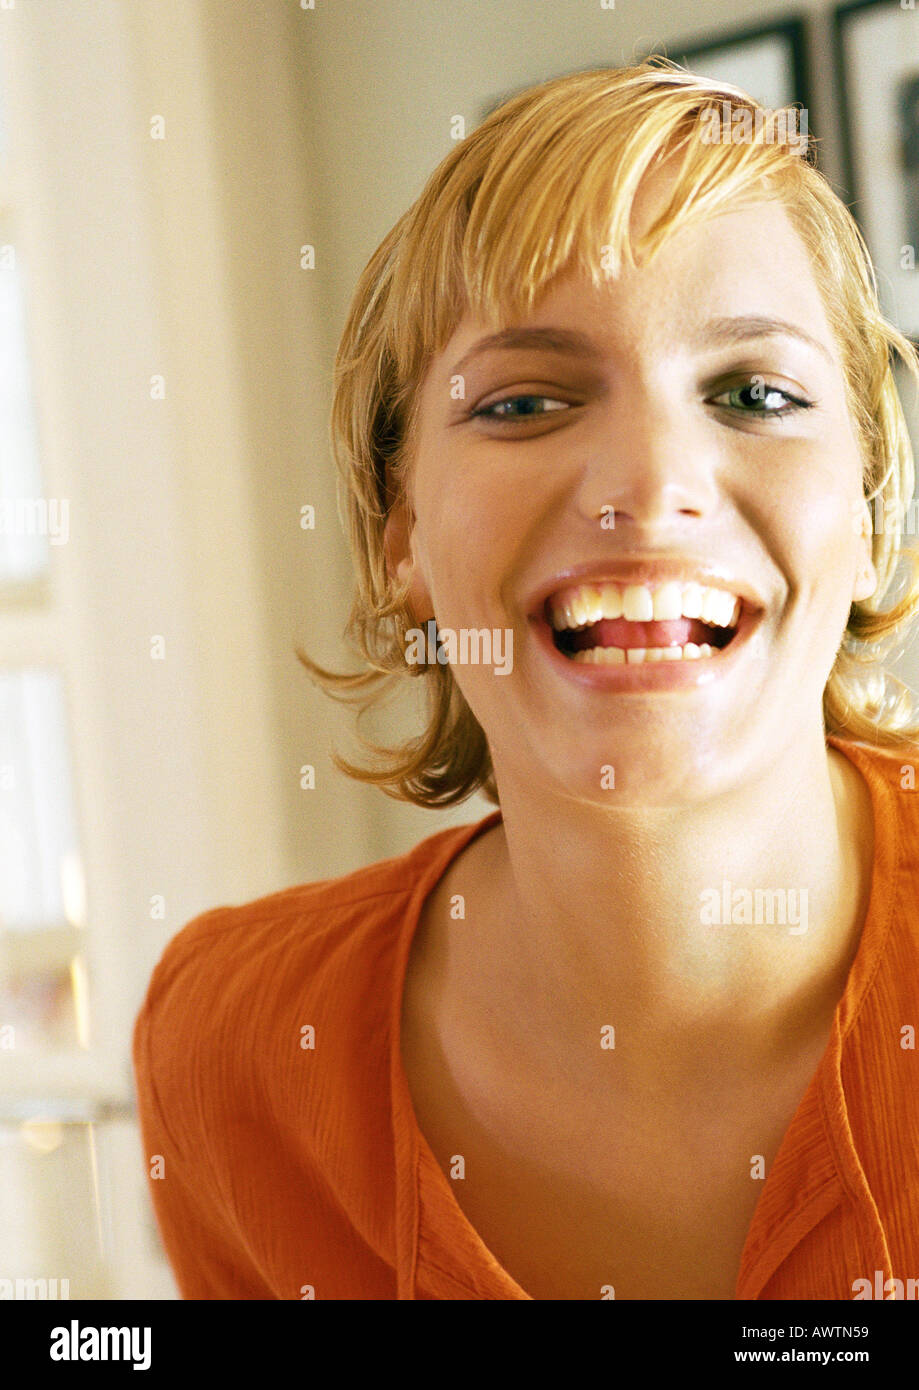 Teen girl laughing, portrait Banque D'Images